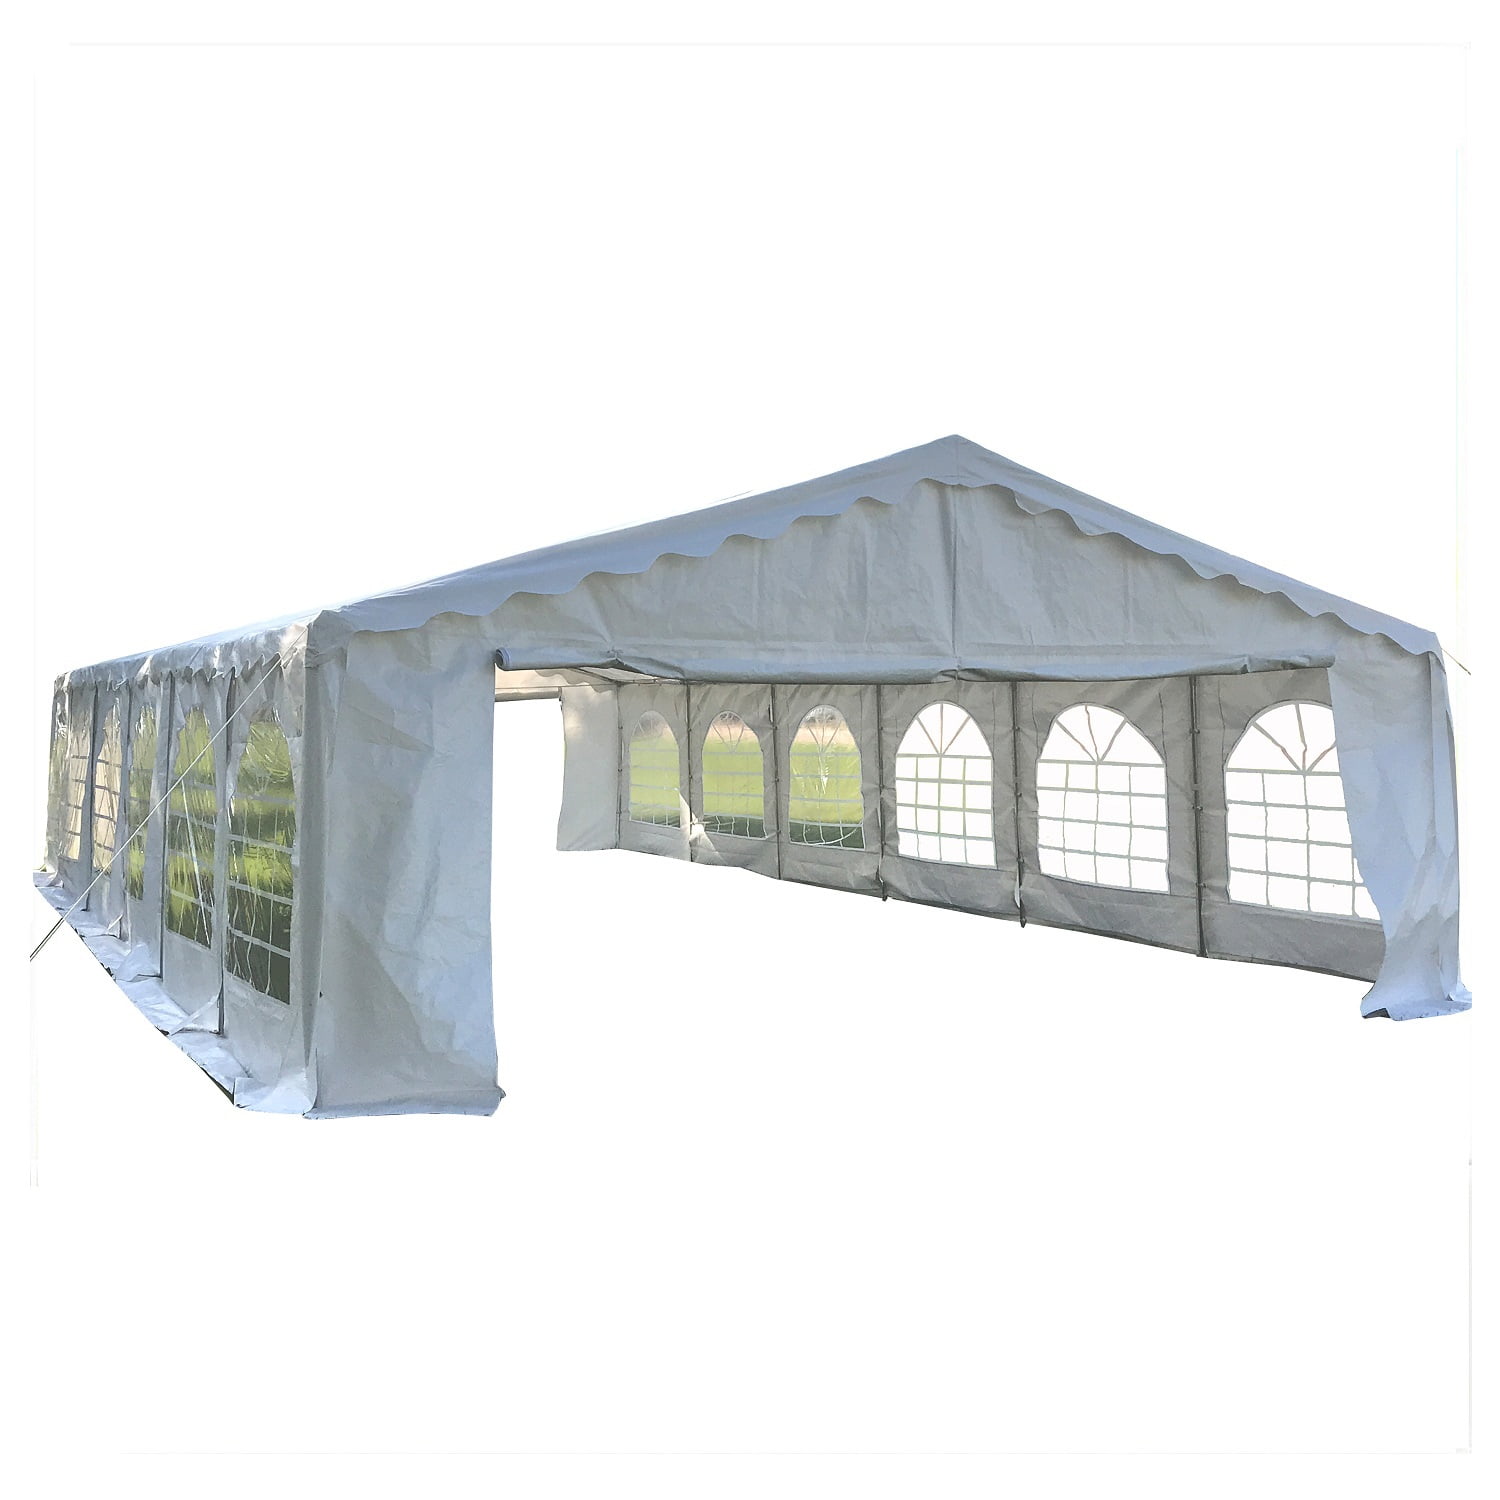 poll getuige Gastvrijheid 40'x20' Budget PVC Party Tent Canopy Shelter - White - By DELTA Canopies -  Walmart.com